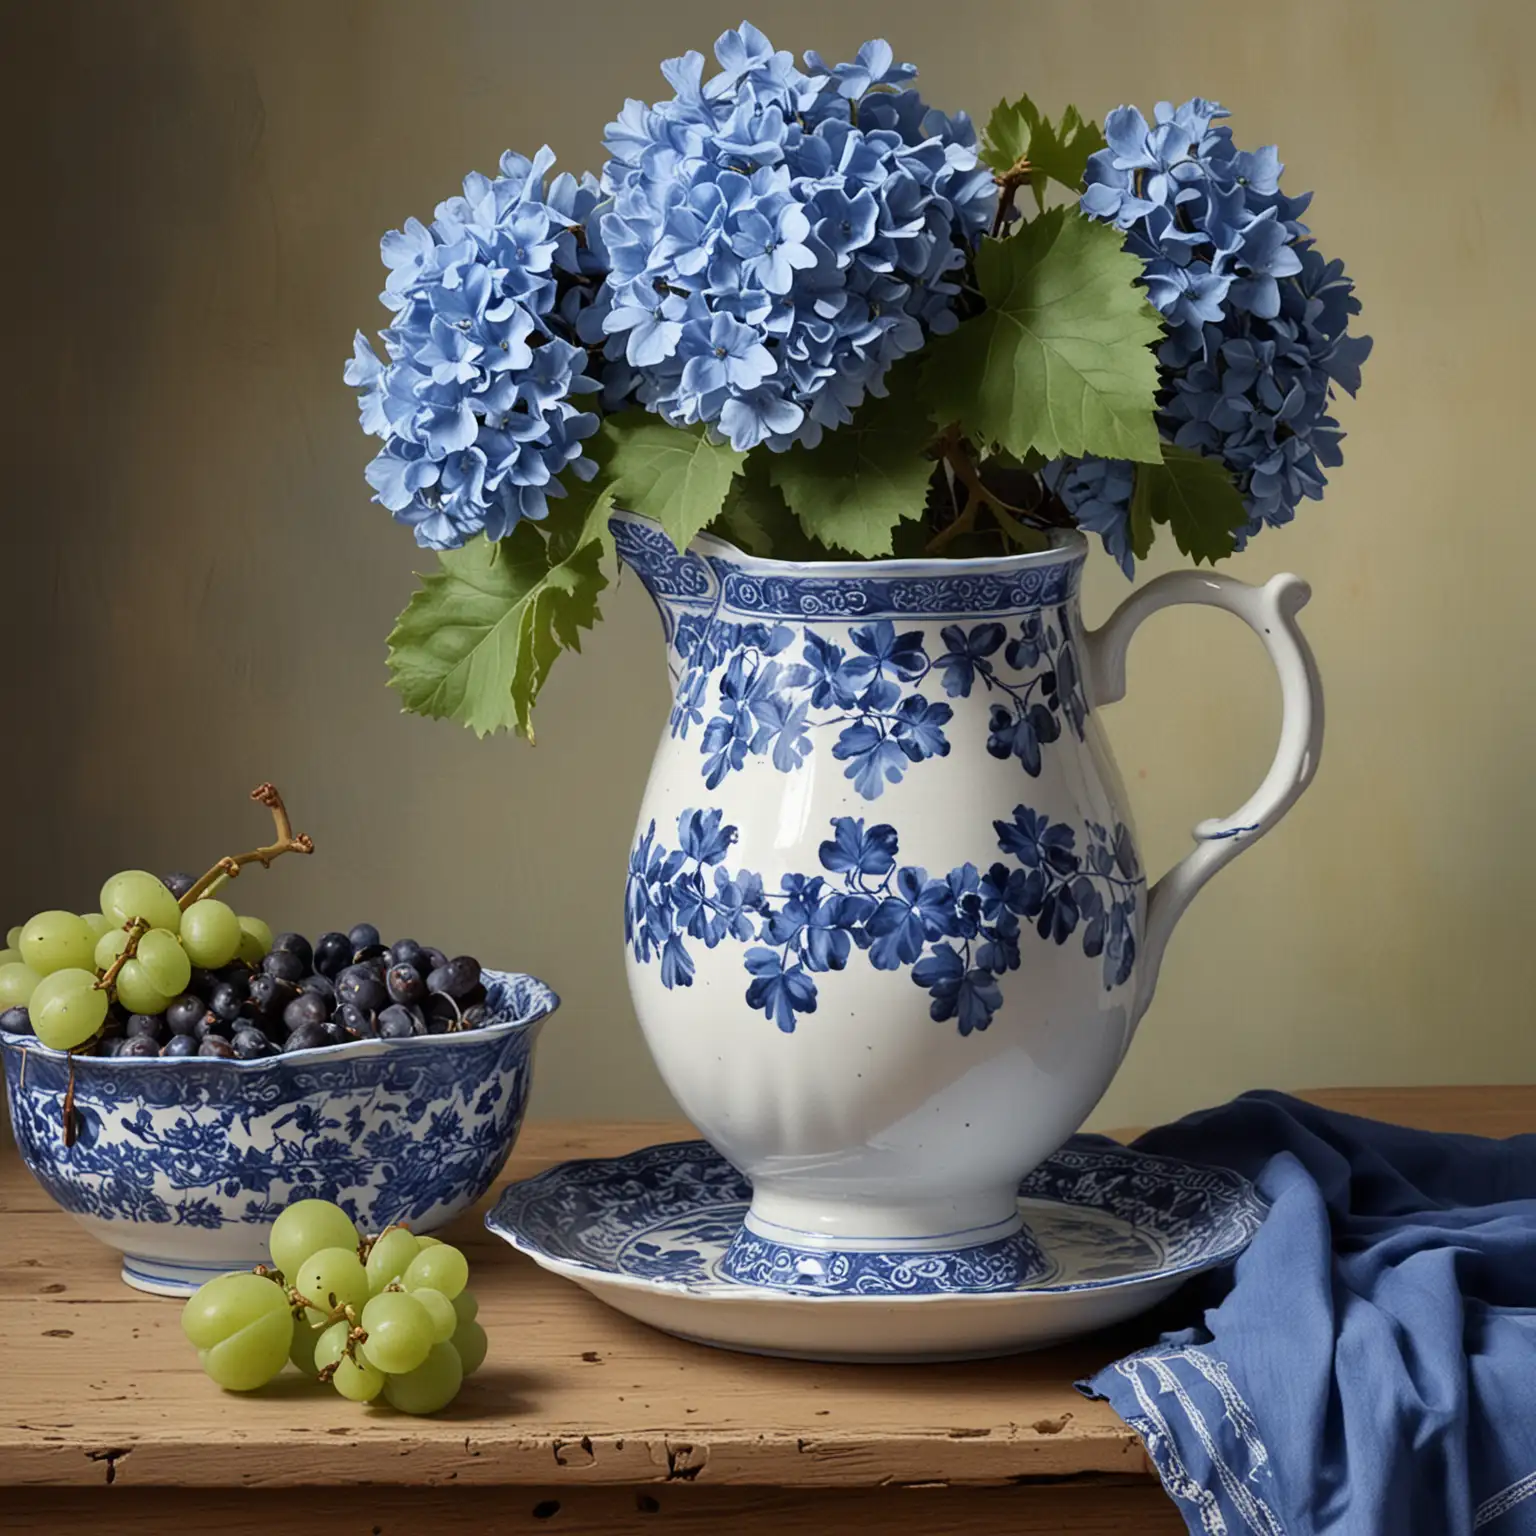 A STILL LIFE PAINTING OF A BLUE AND WHITE PITCHER WITH  BLUE HYDRANGES AND A BLUE AND WHITE CUP AND SAUCER W[TH GREEN GRAPES ON A SAUCER